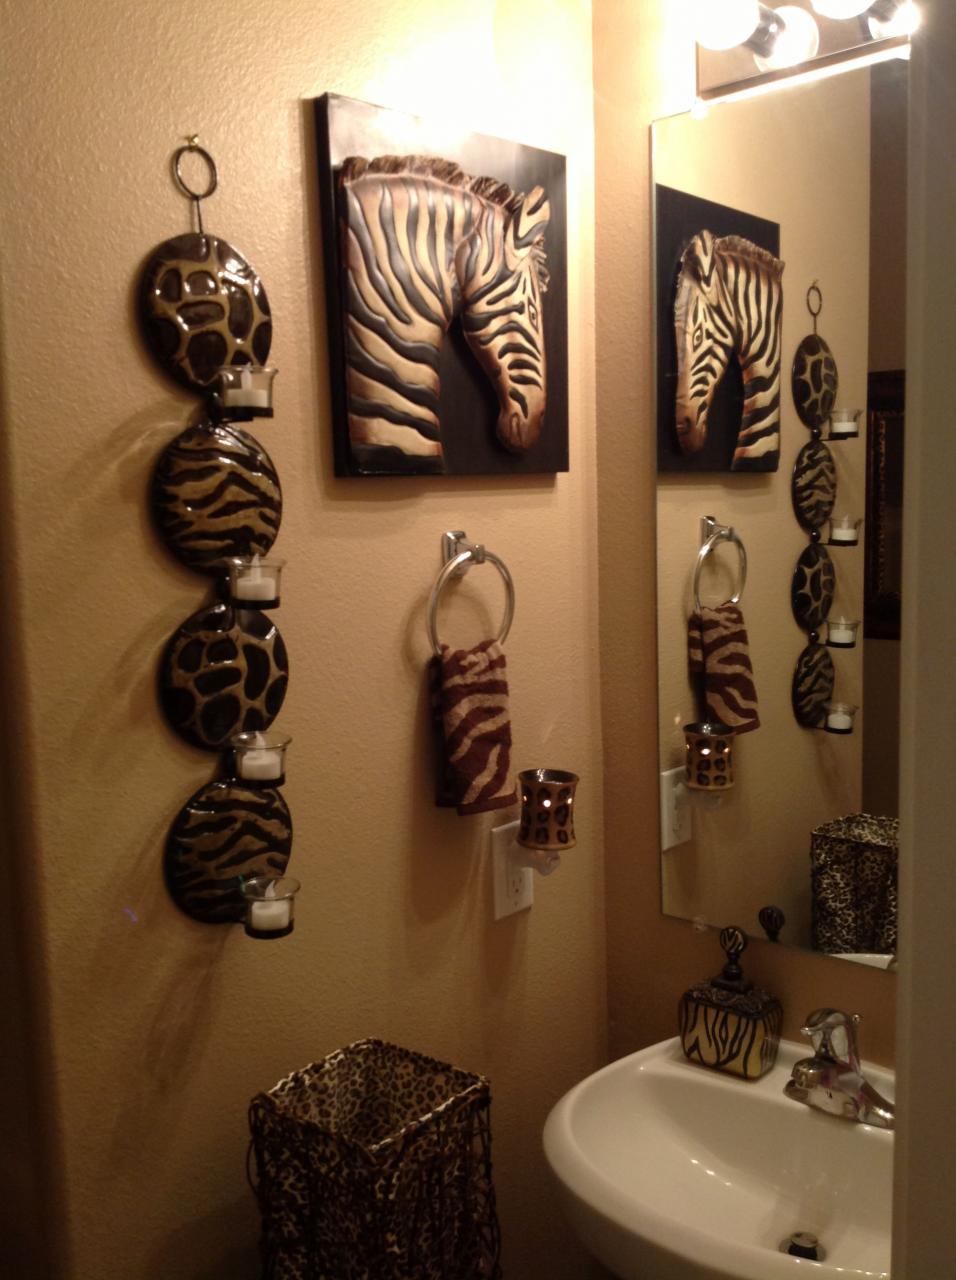 the bathroom is decorated with zebras and other animal themed items on